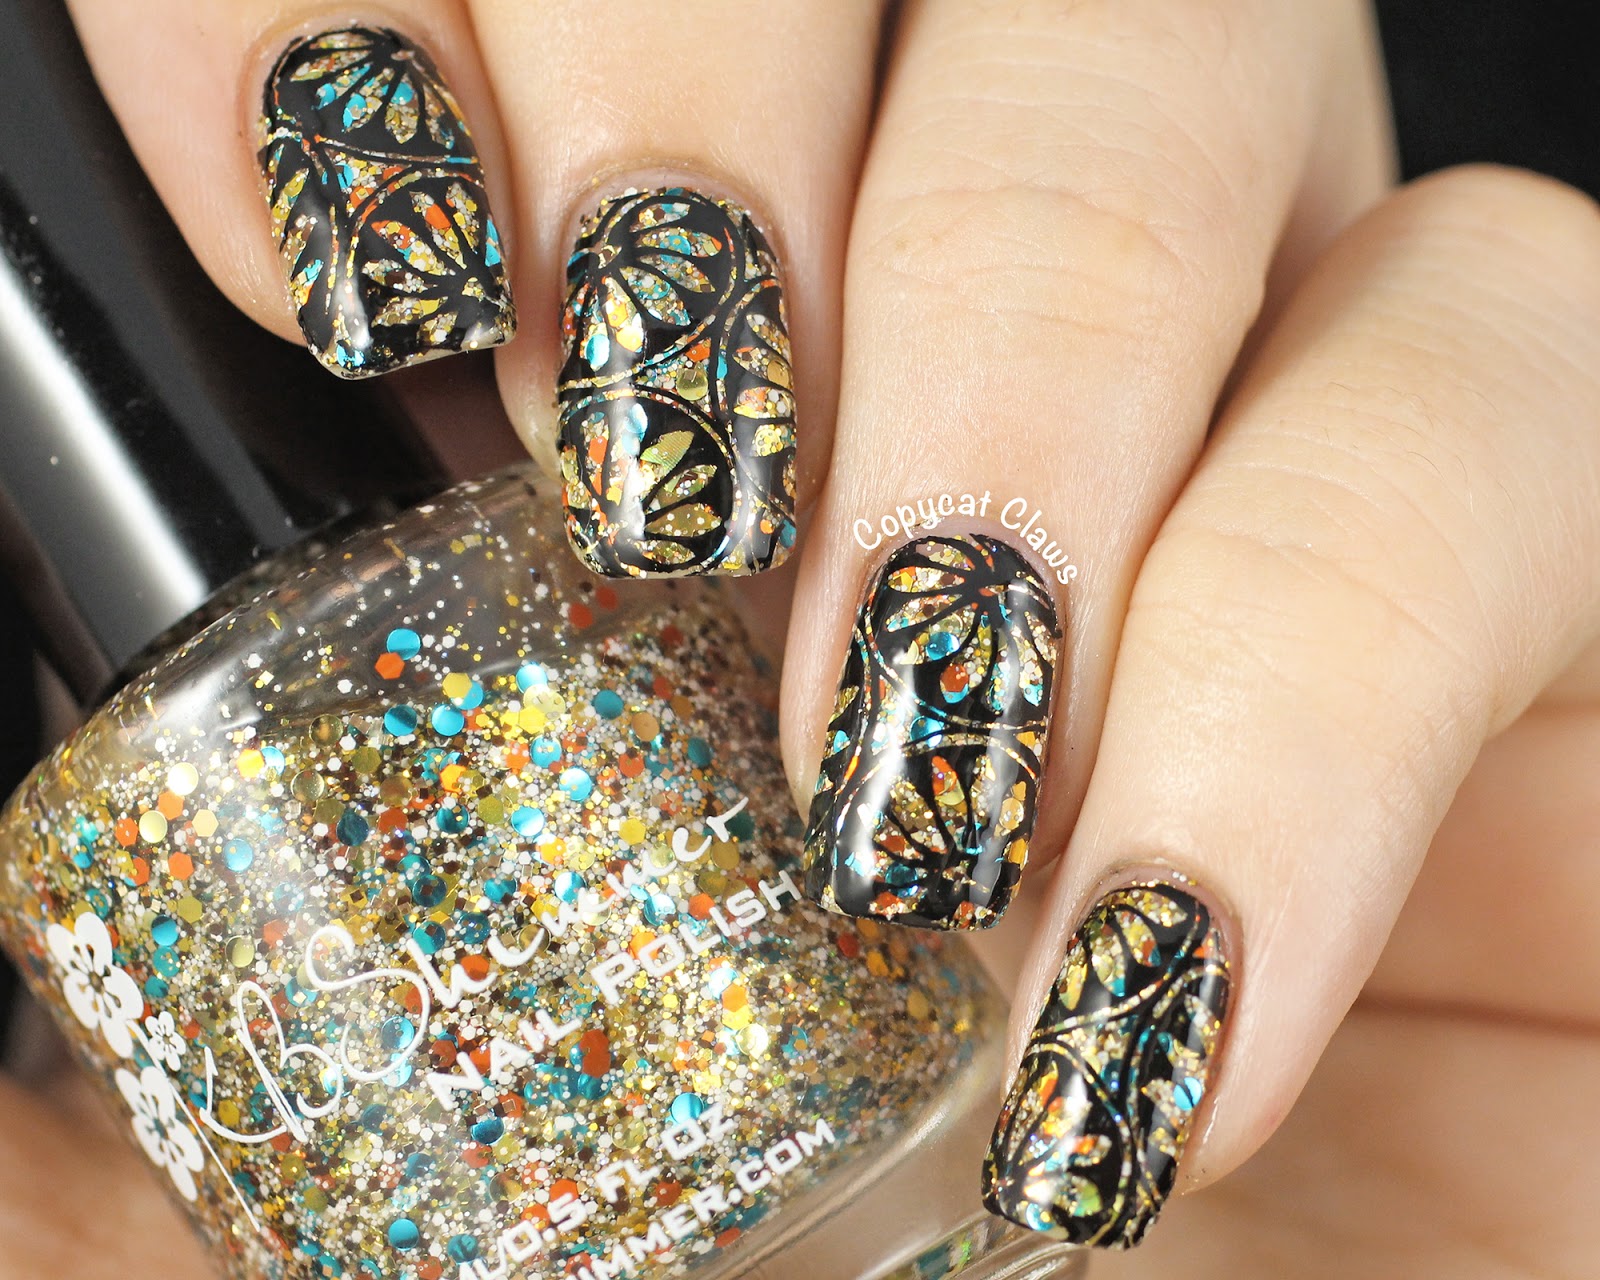 Copycat Claws: 31DC2014 Day 17 - Stamping Over Glitter